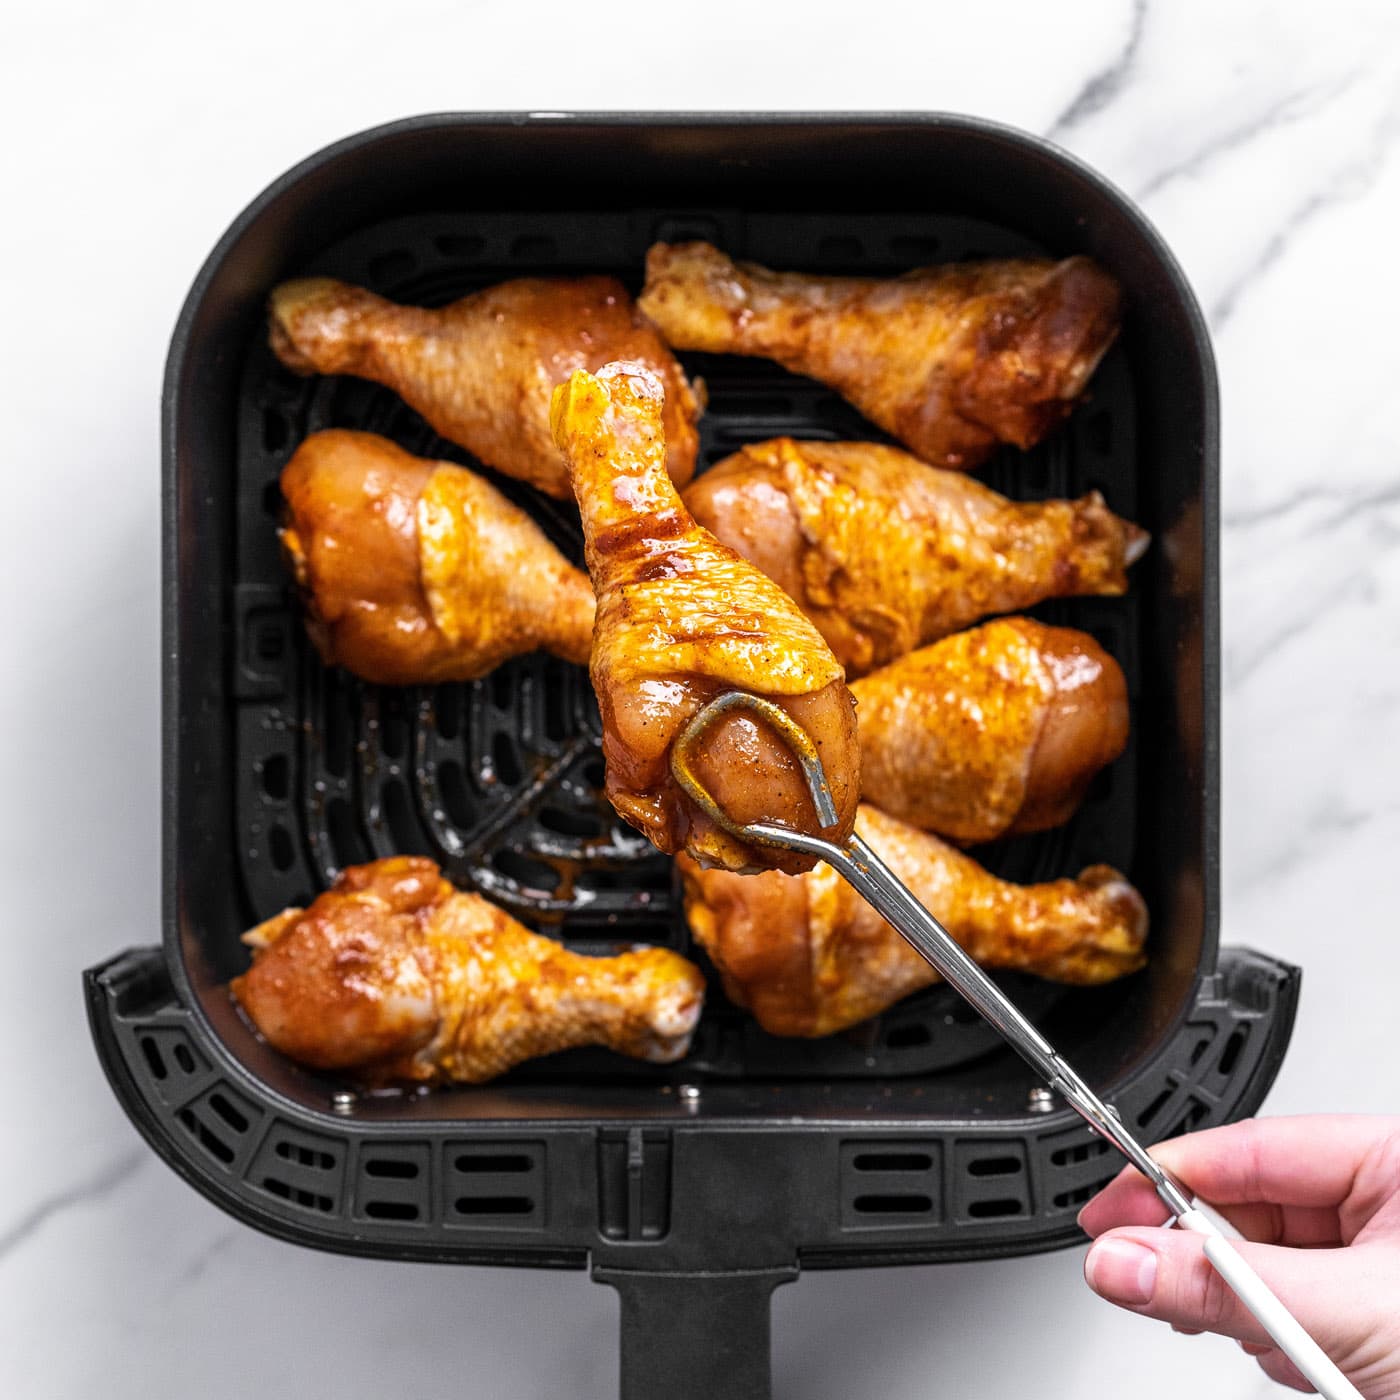 tongs placing chicken leg into air fryer